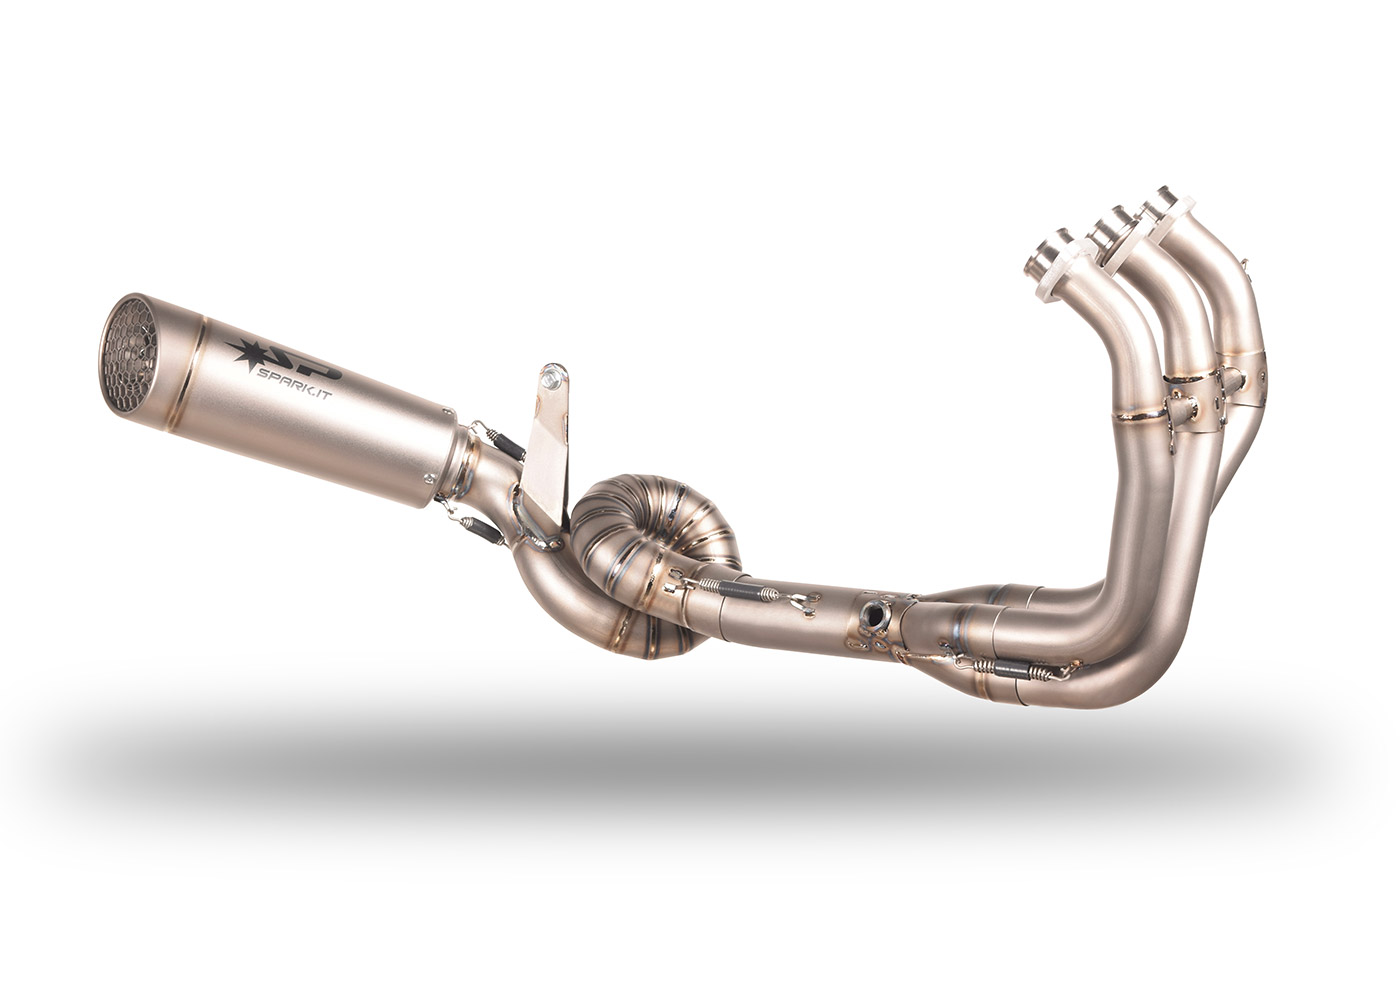 Full exhaust system with welded collector for Yamaha Tracer 900 